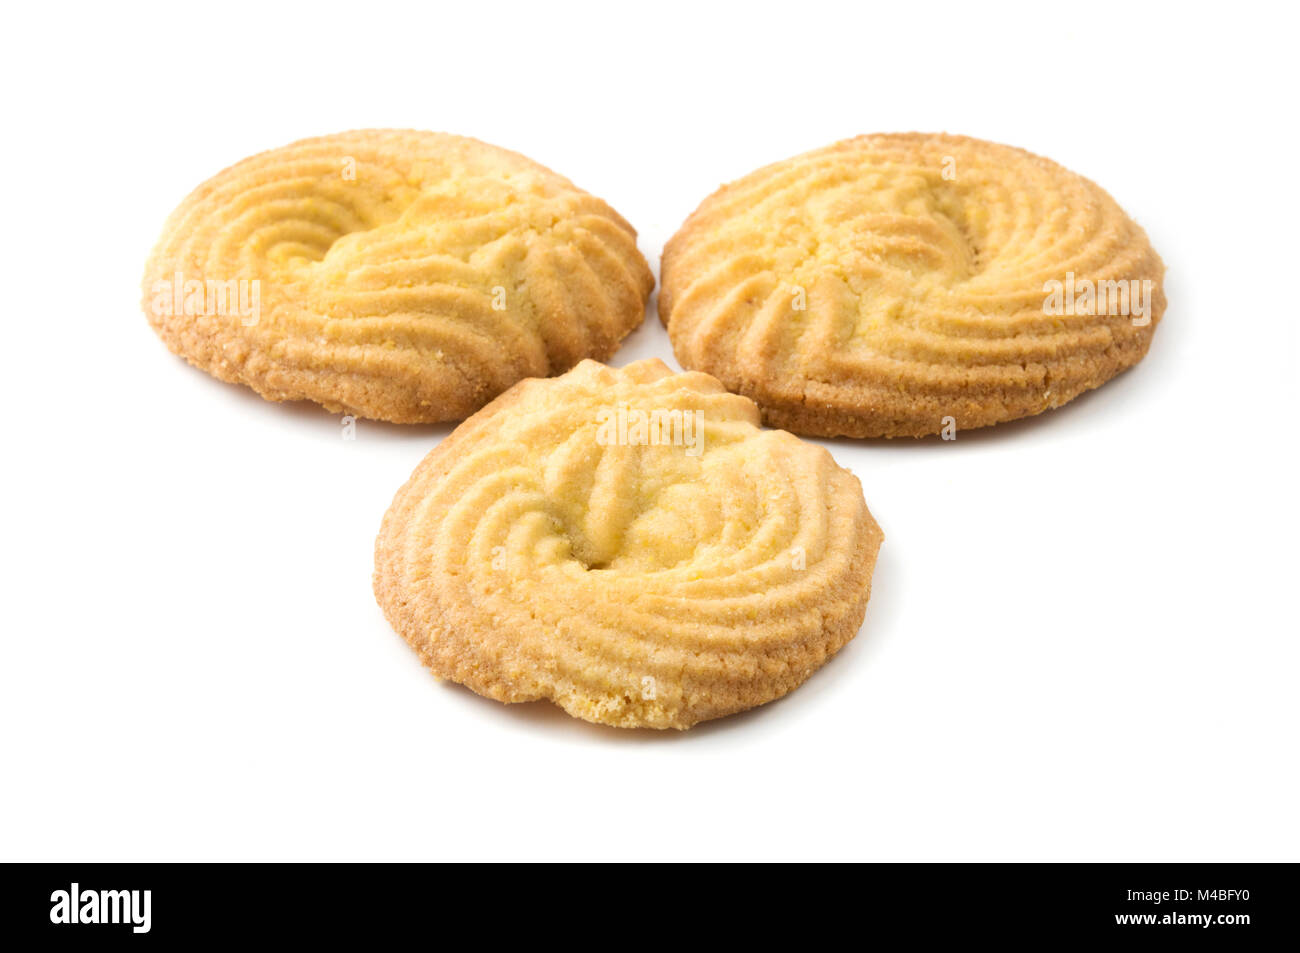 Paste di Meliga, a traditional piedmontese biscuit made with maize flour, on a white background Stock Photo